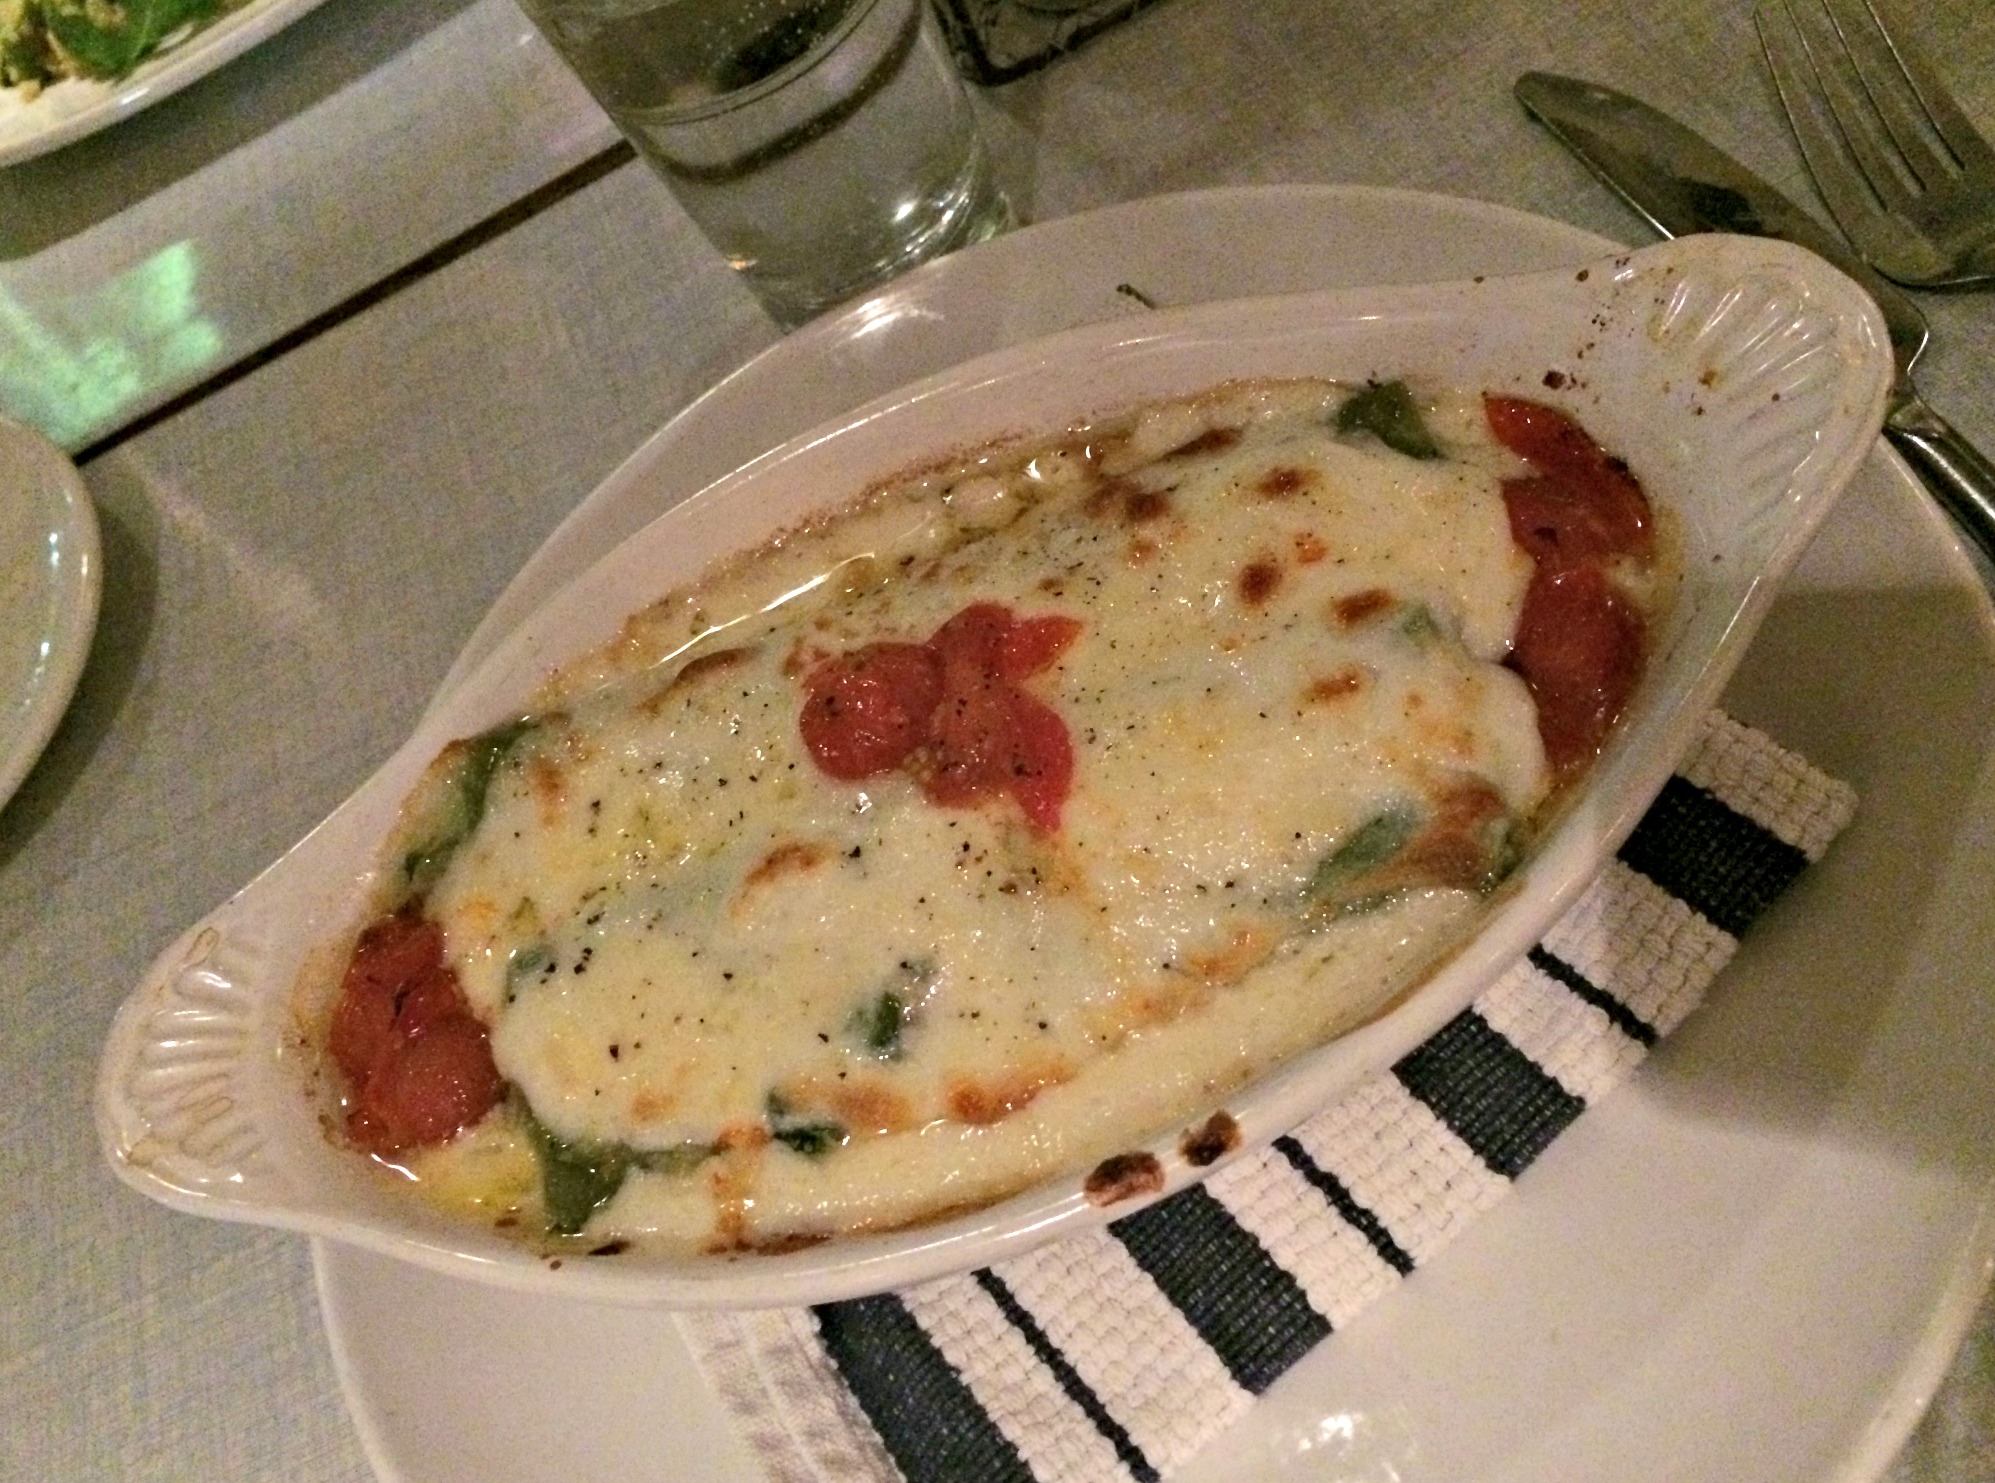 local spinach noodles cannelloni